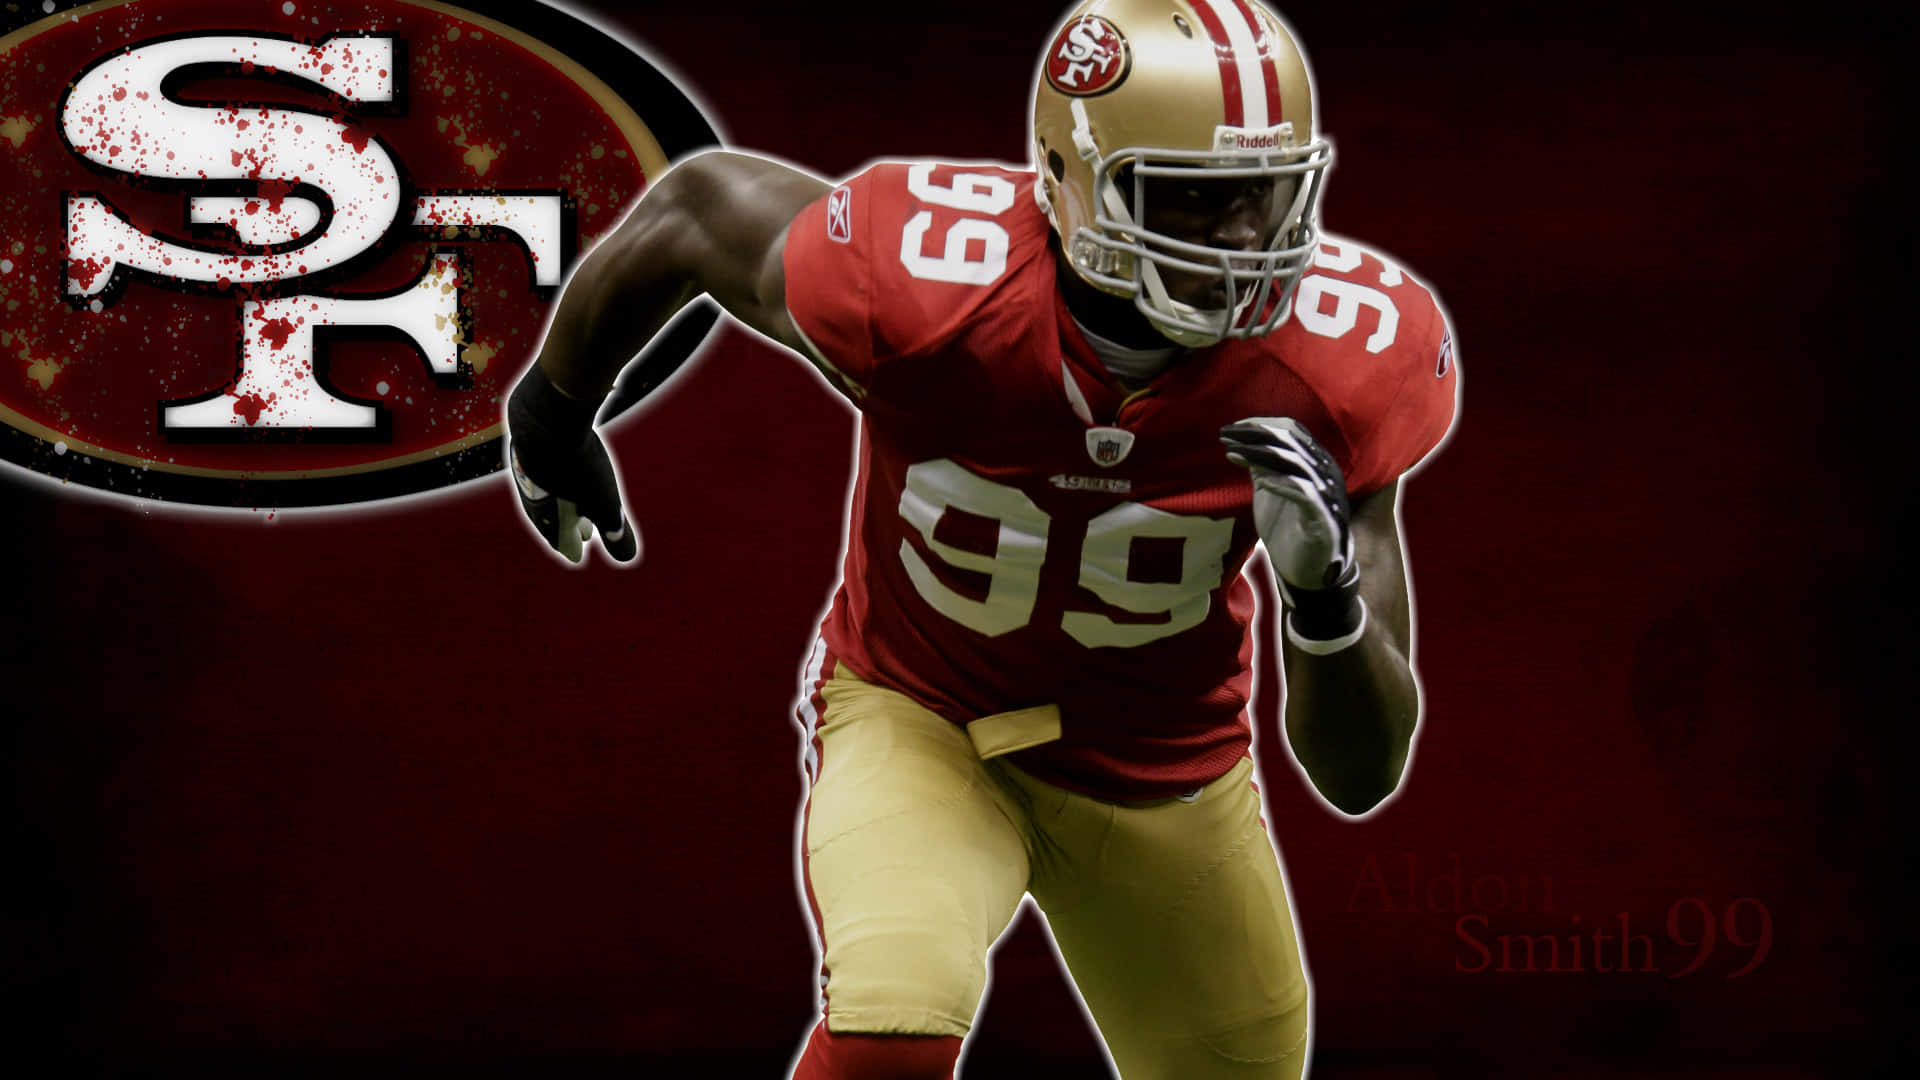 Show your true colors and join the faithful for the San Francisco 49ers!